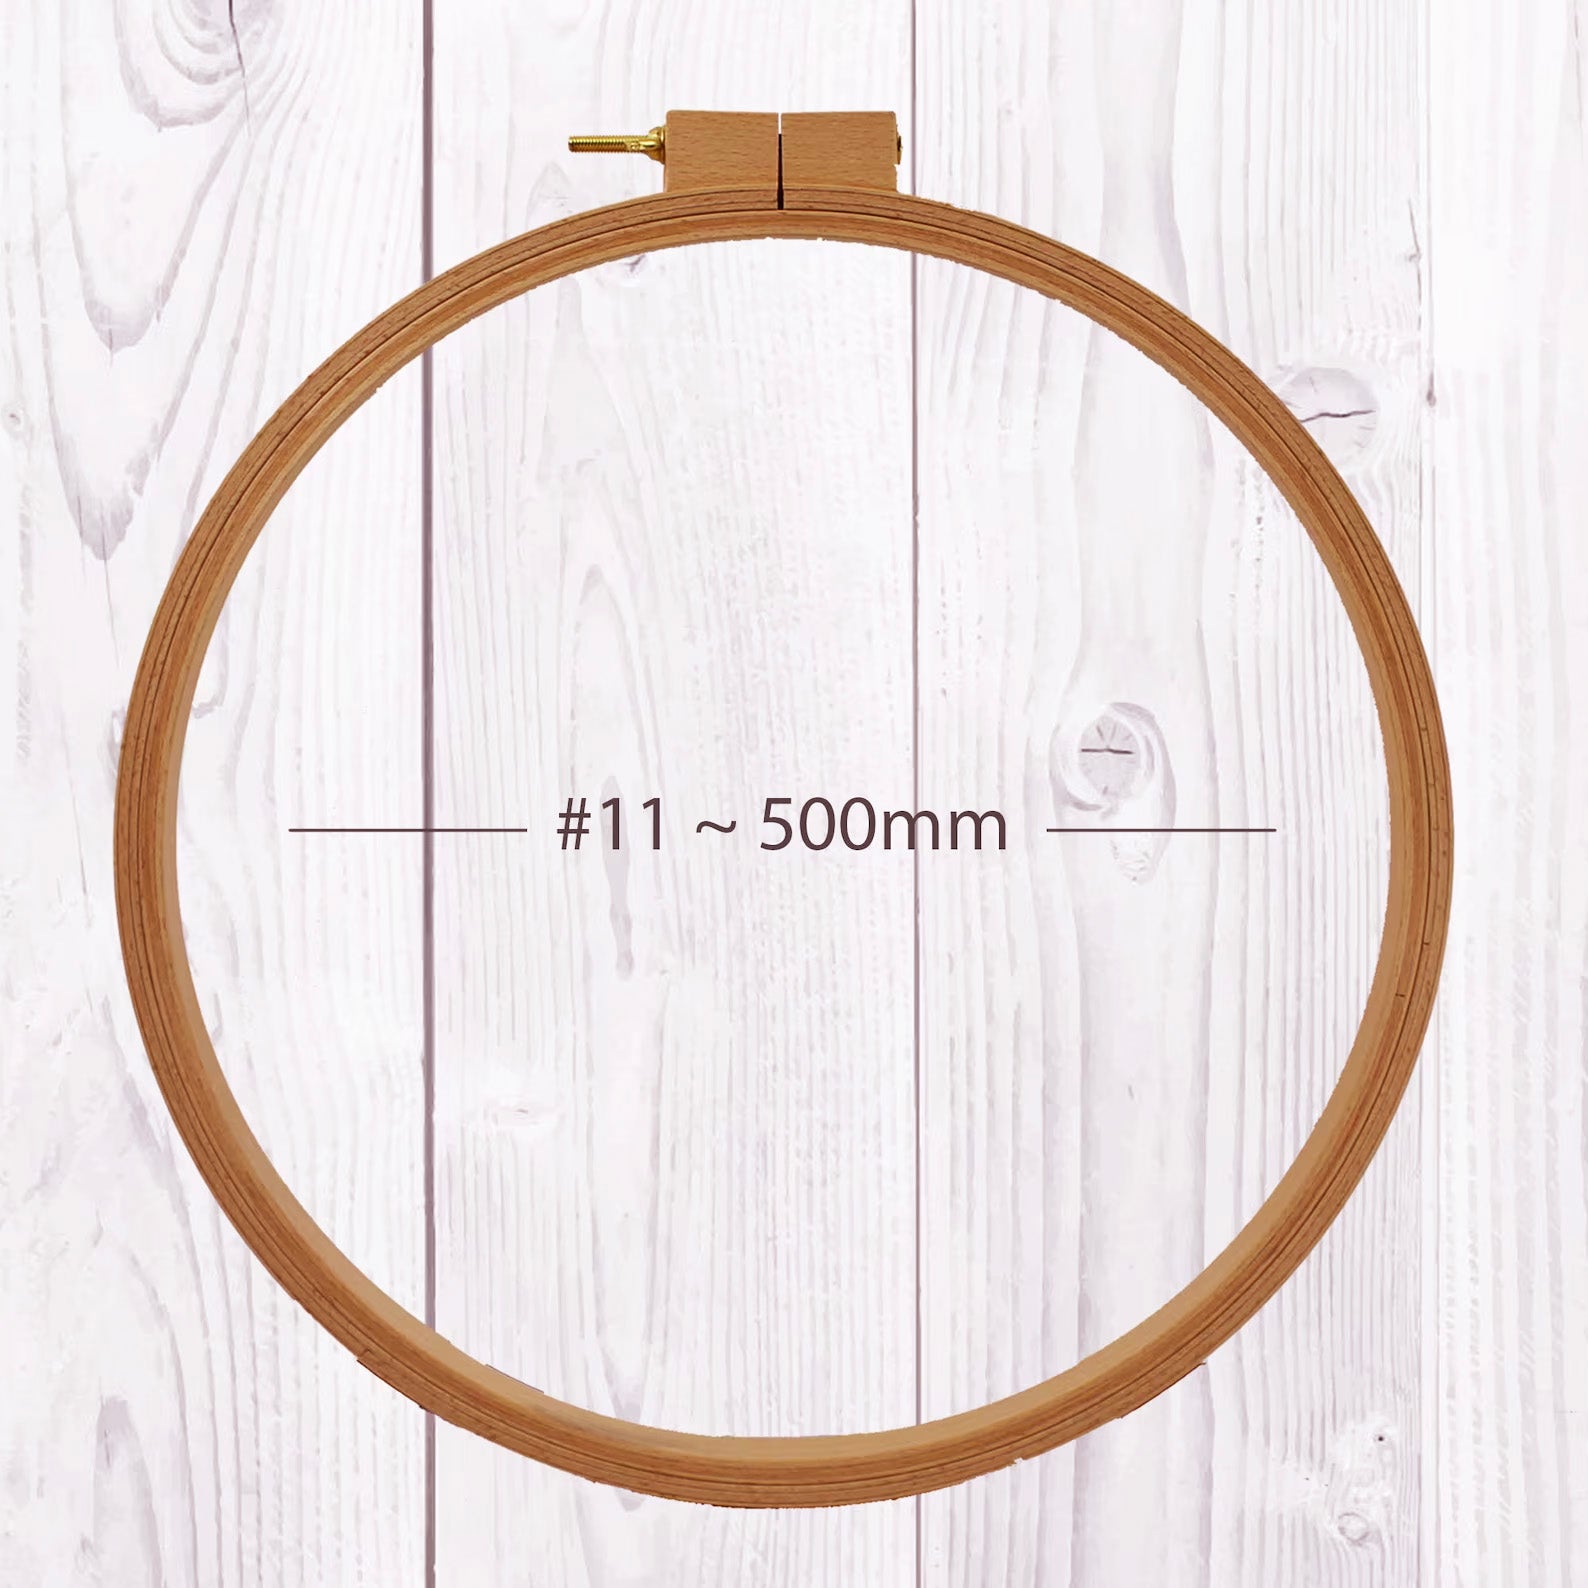 Wooden Cross Stitch Embroidery Hoops, Round, 11inch